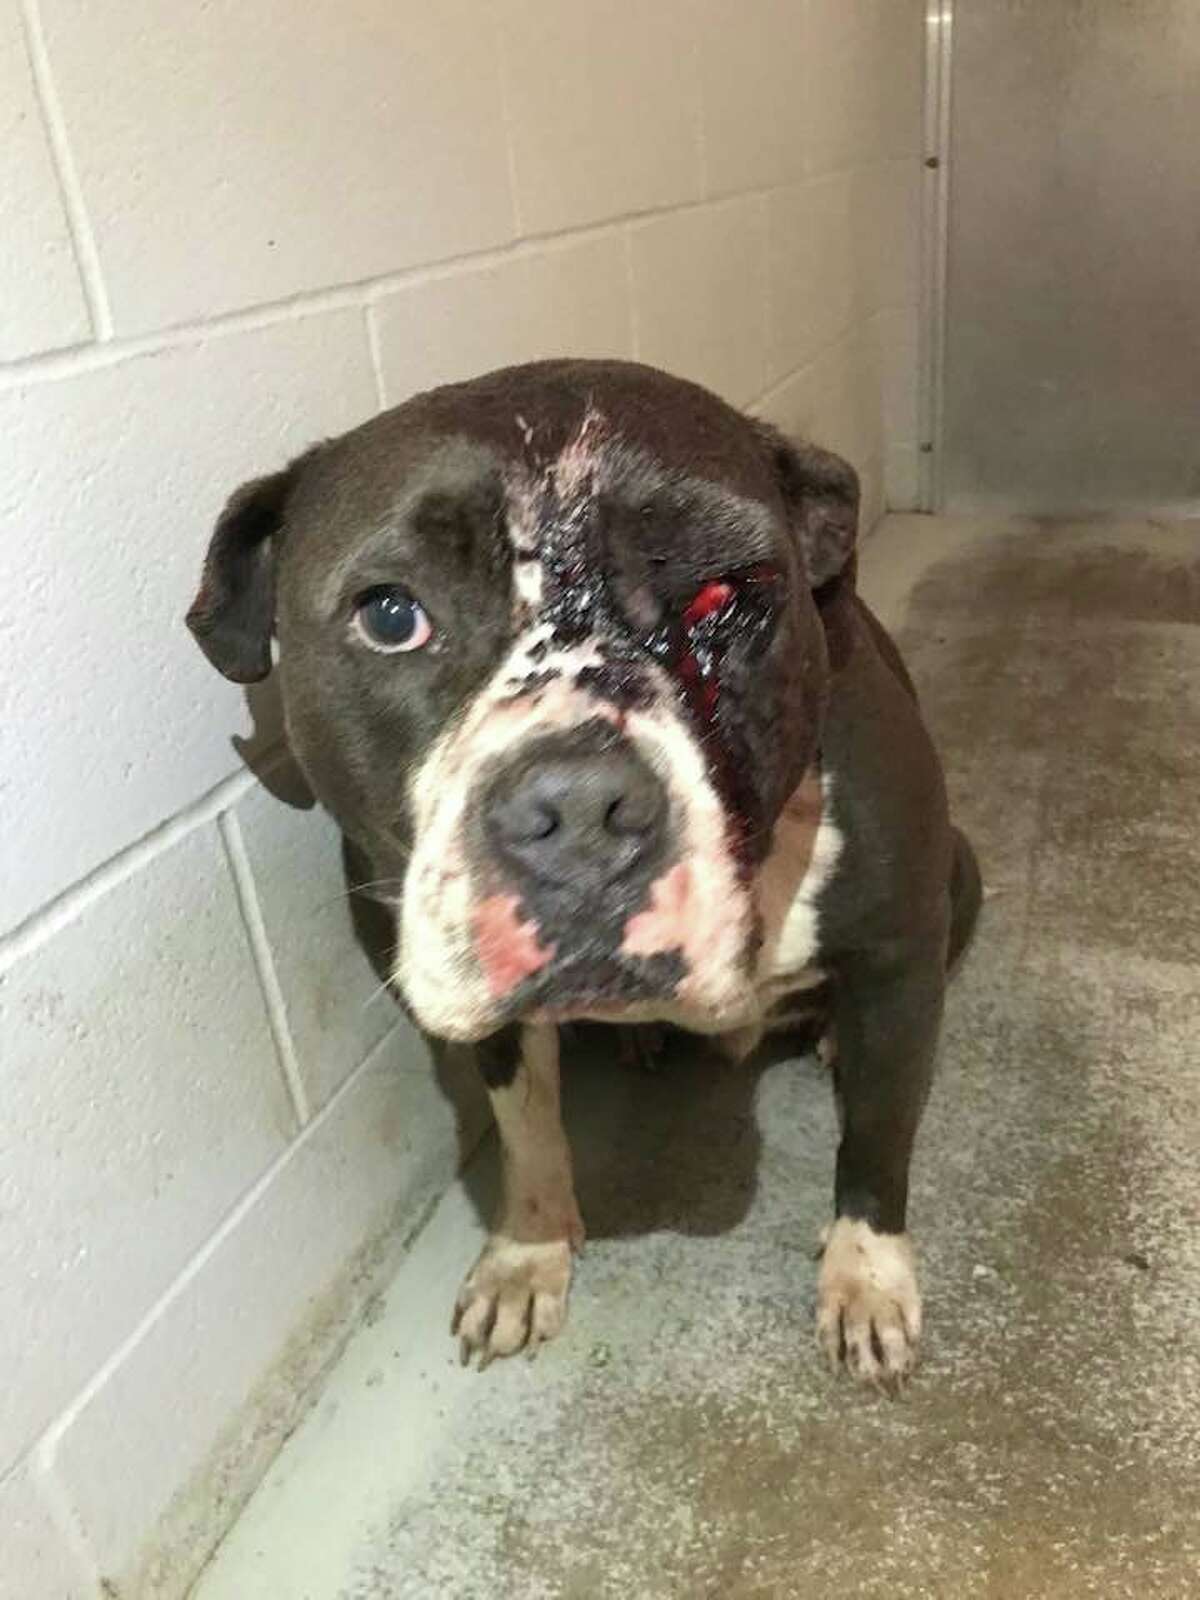 Clarence is an 11-year-old pitbull that was found abandoned in a small kennel with gunshot wounds to the face at a Richmond area park last month.